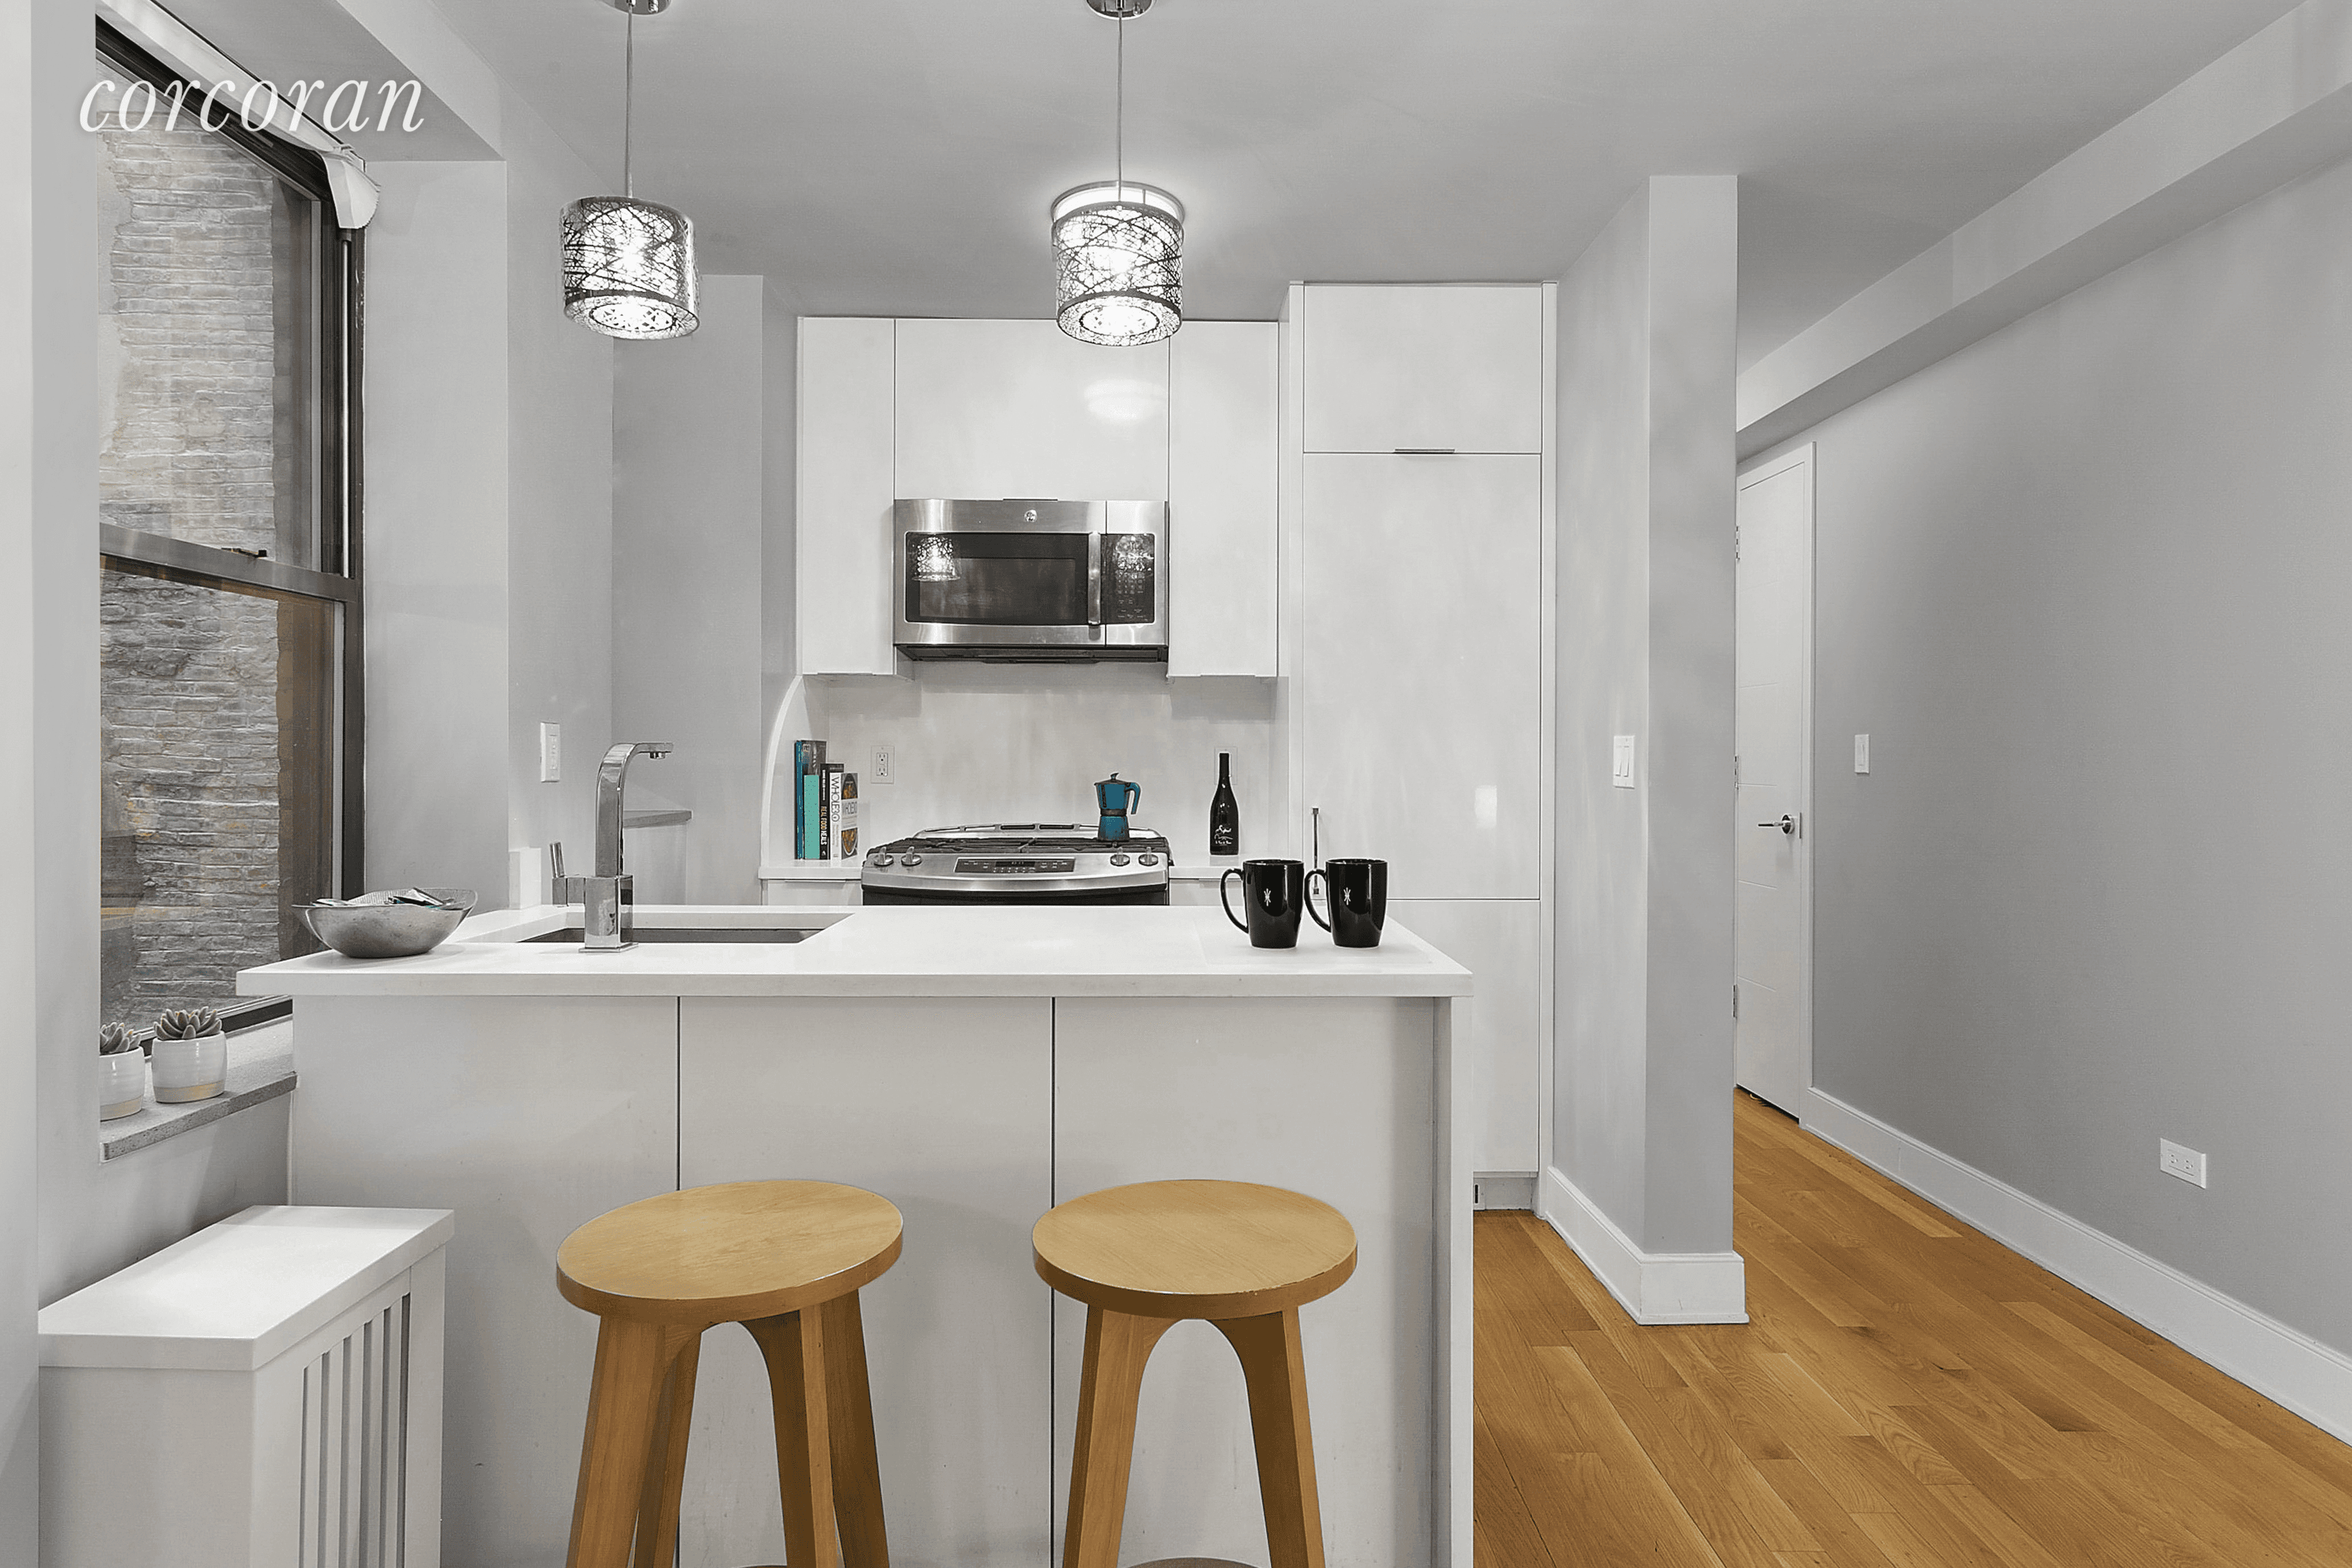 One of the largest one bedroom layouts available in The Irvin House, apartment 3D offers a generous floorplan that can easily convert to a 2 bedroom.